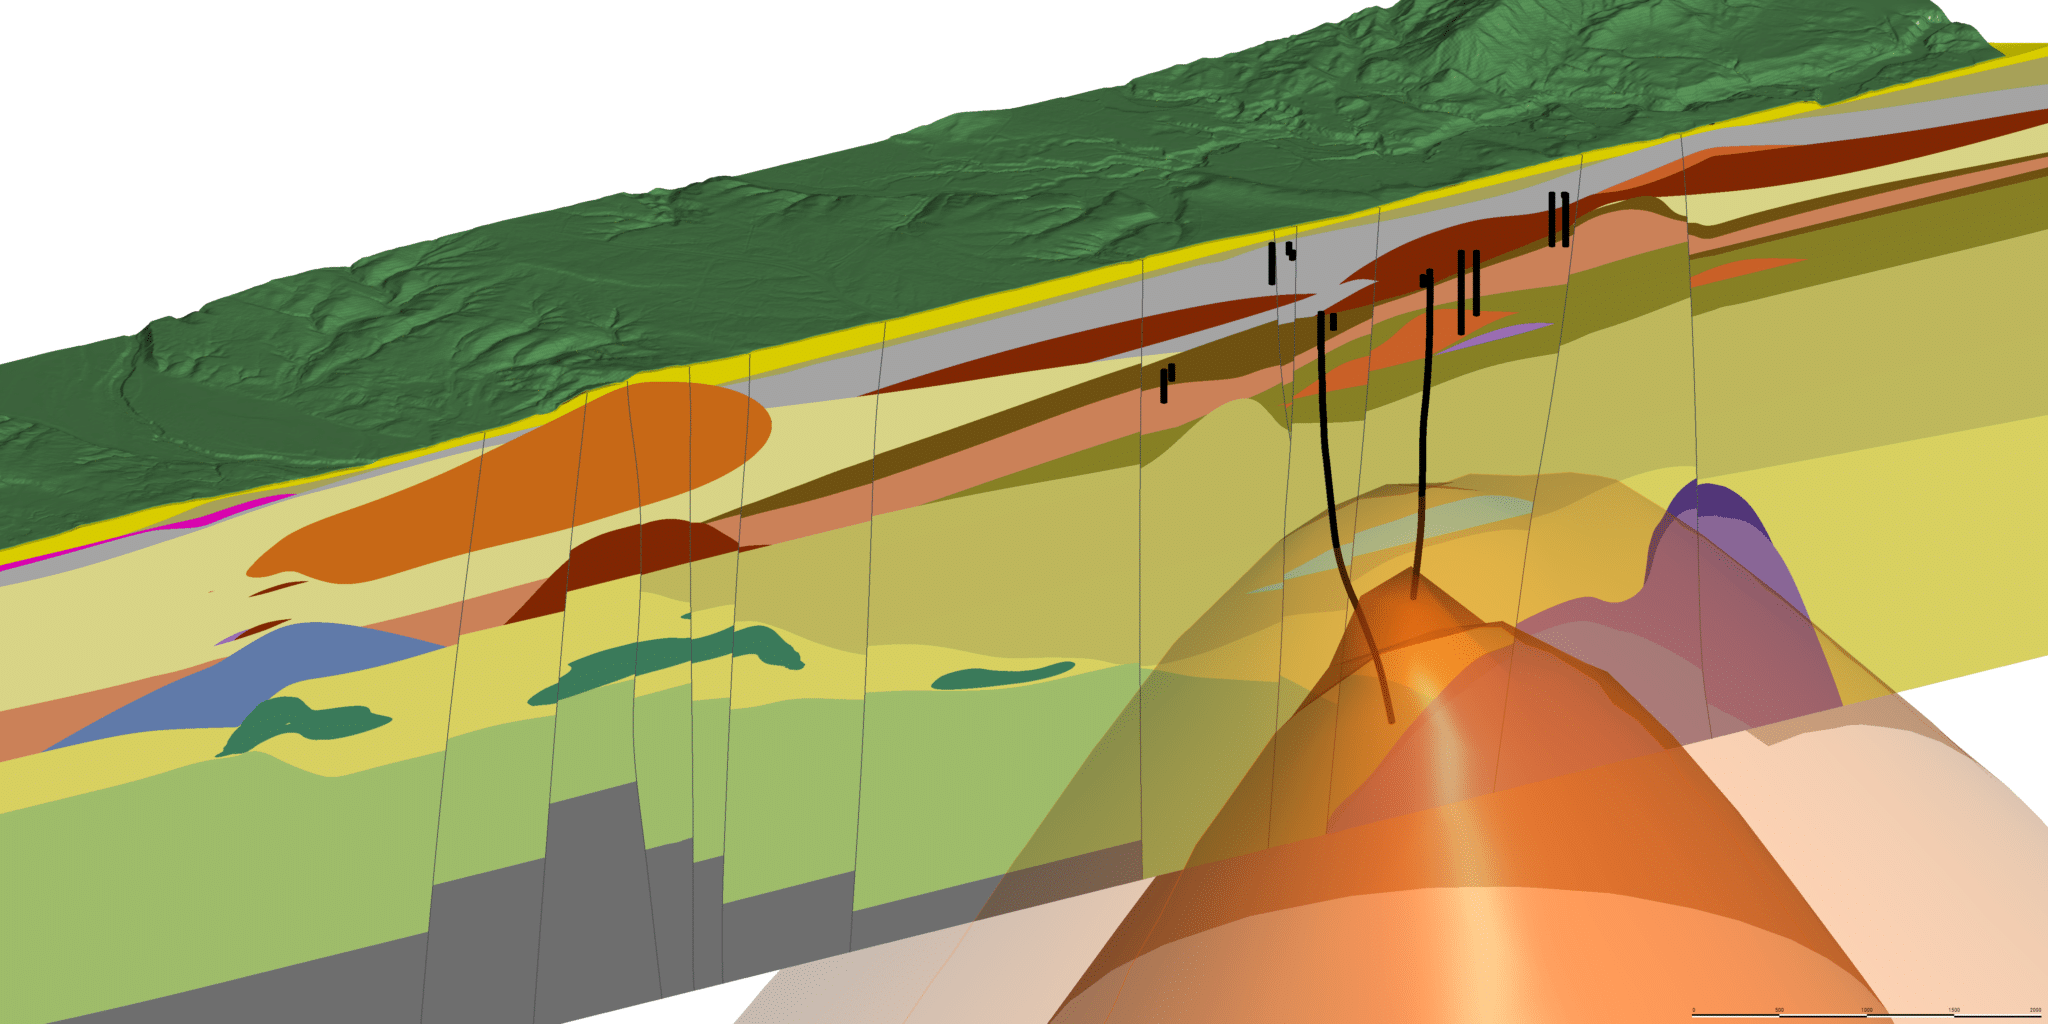 : A slice through geological and temperature models built in Leapfrog Energy of the Rotokawa and Ngā Tamariki Geothermal Fields in New Zealand, Operated by Mercury